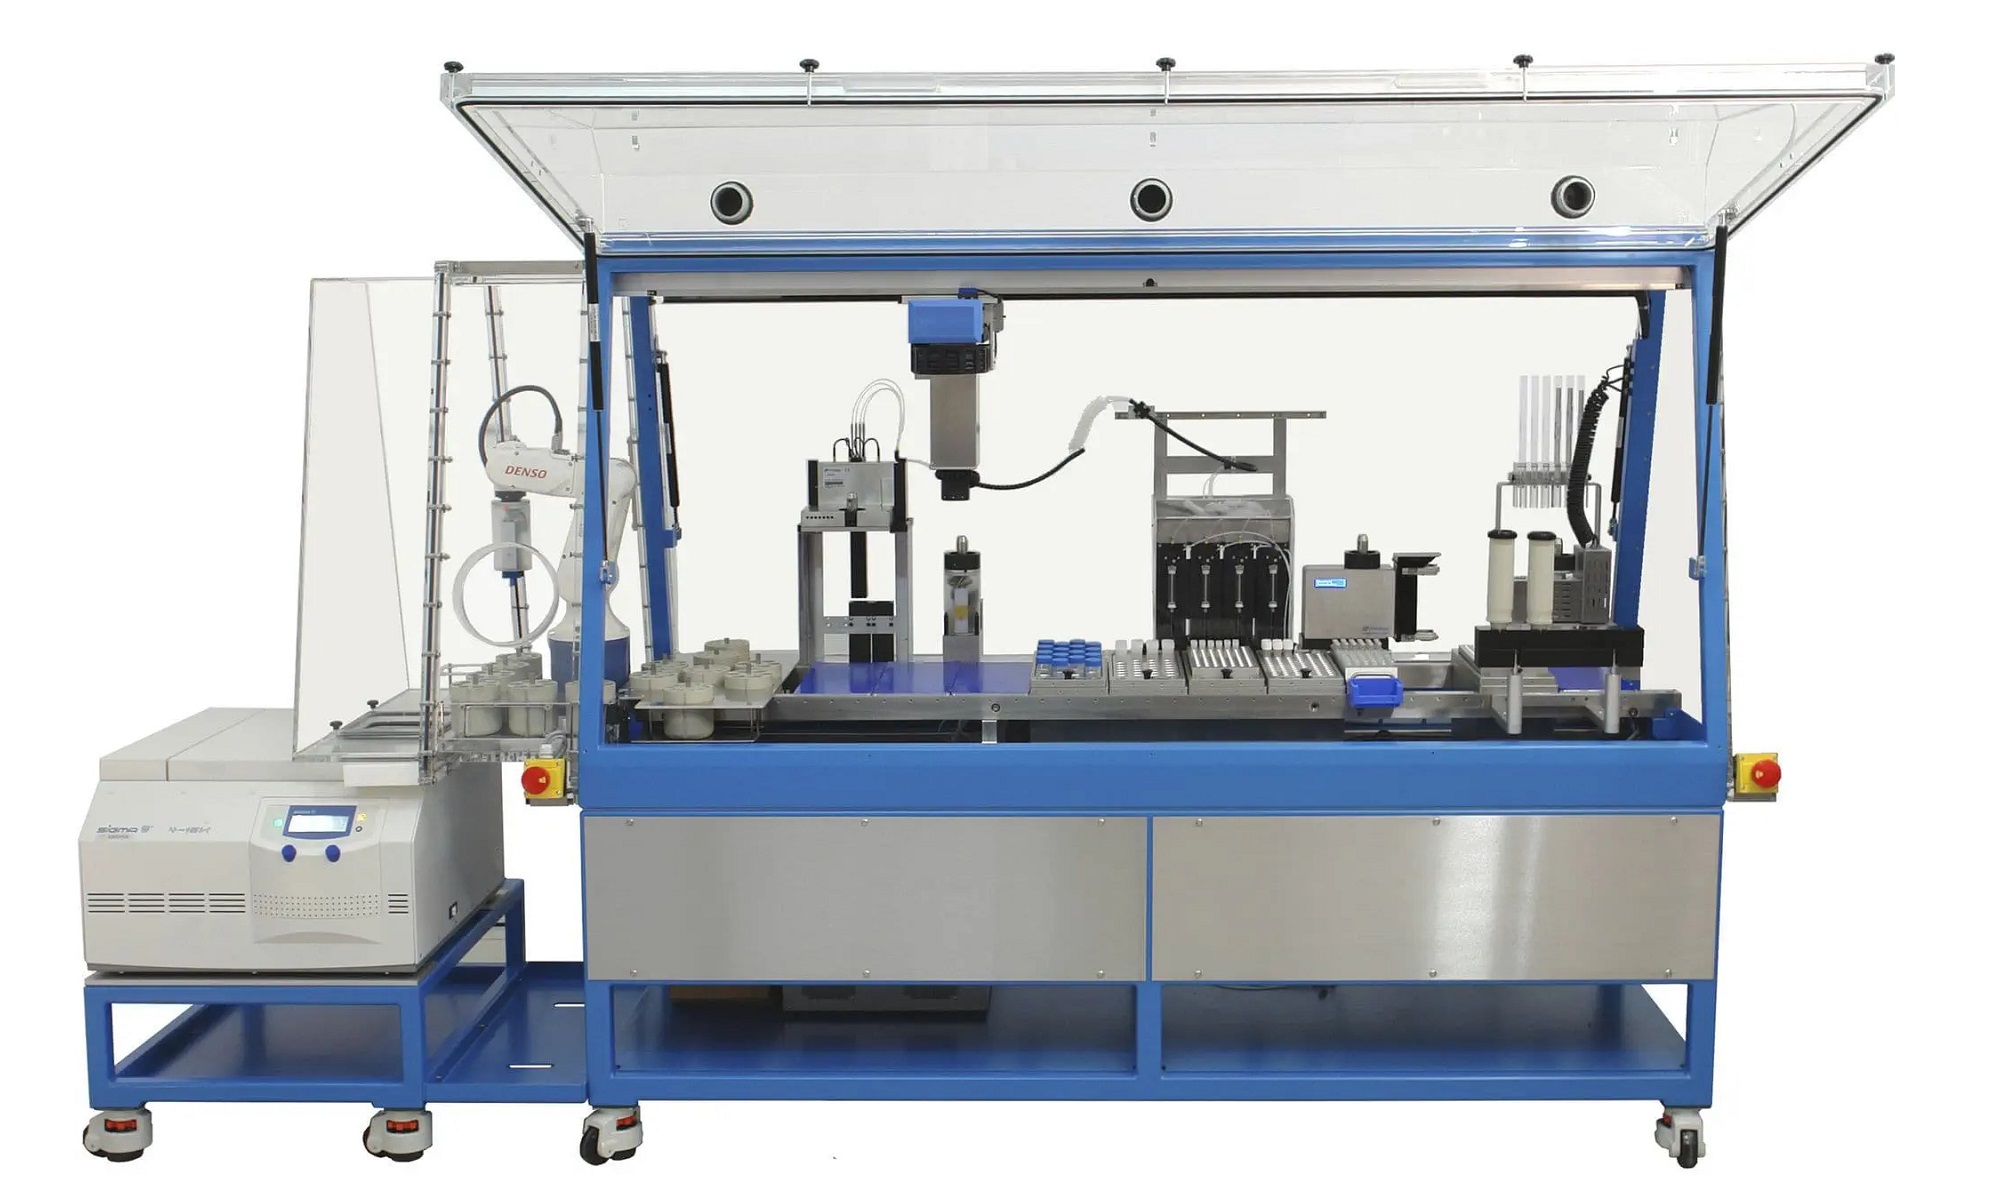 Enlarged view: Chemspeed automated platform for chemical synthesis